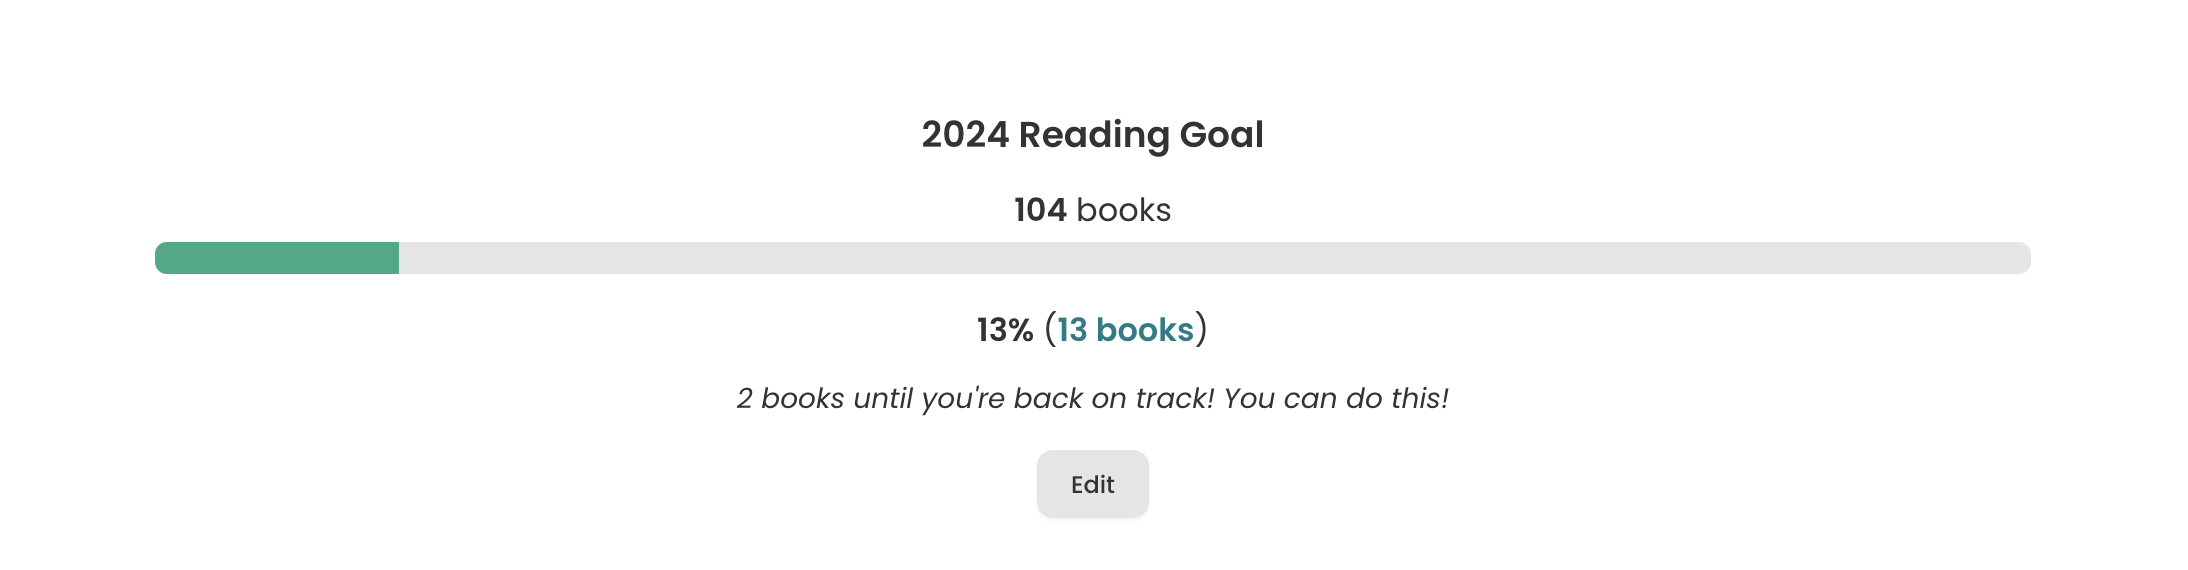 I’m doing the most | 2024 Reading Goals and Challenges